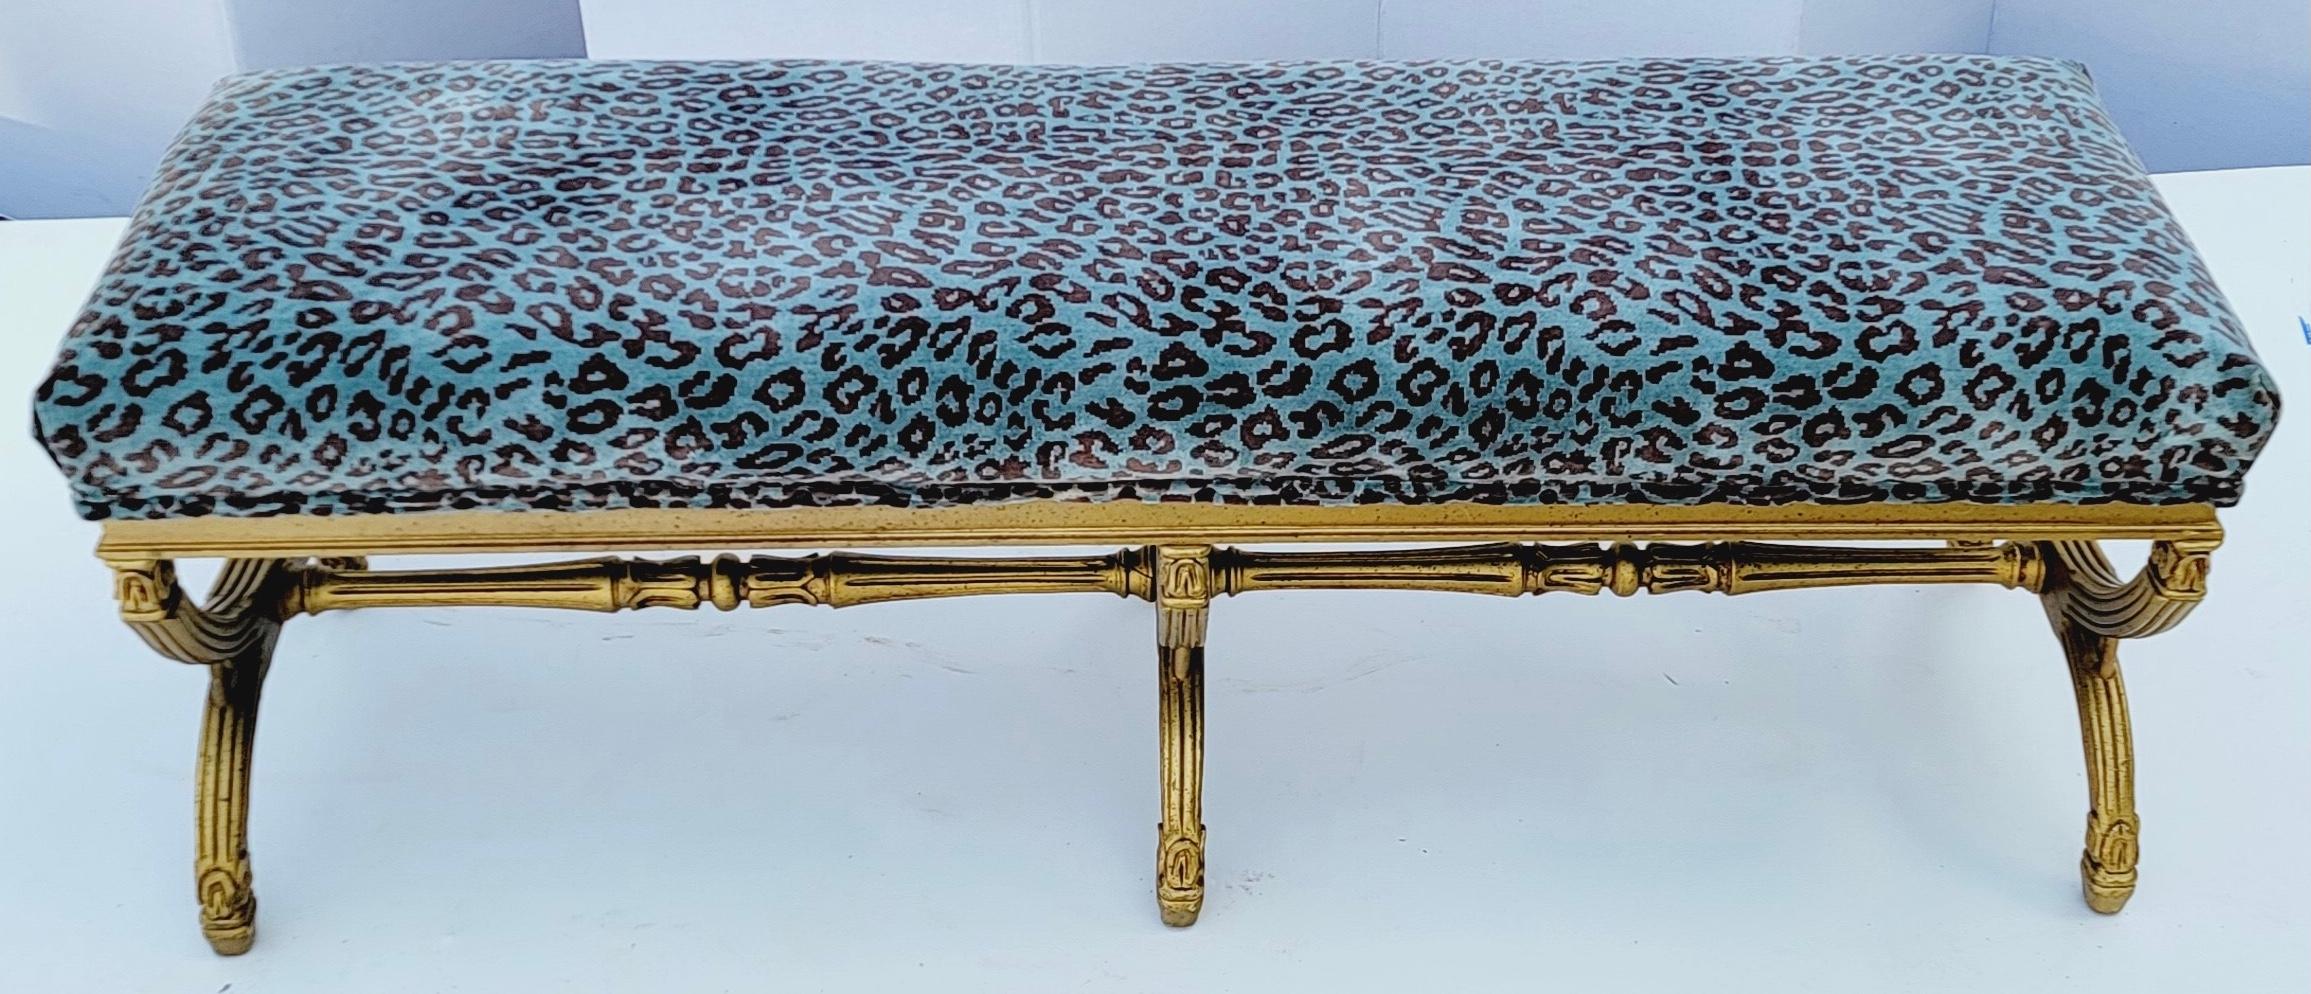 This is a long neo-classical style Italian giltwood bench in a turquoise leopard velvet. It dates is a mid-century piece and is Italian. The upholstery is recent and is in very good condition.